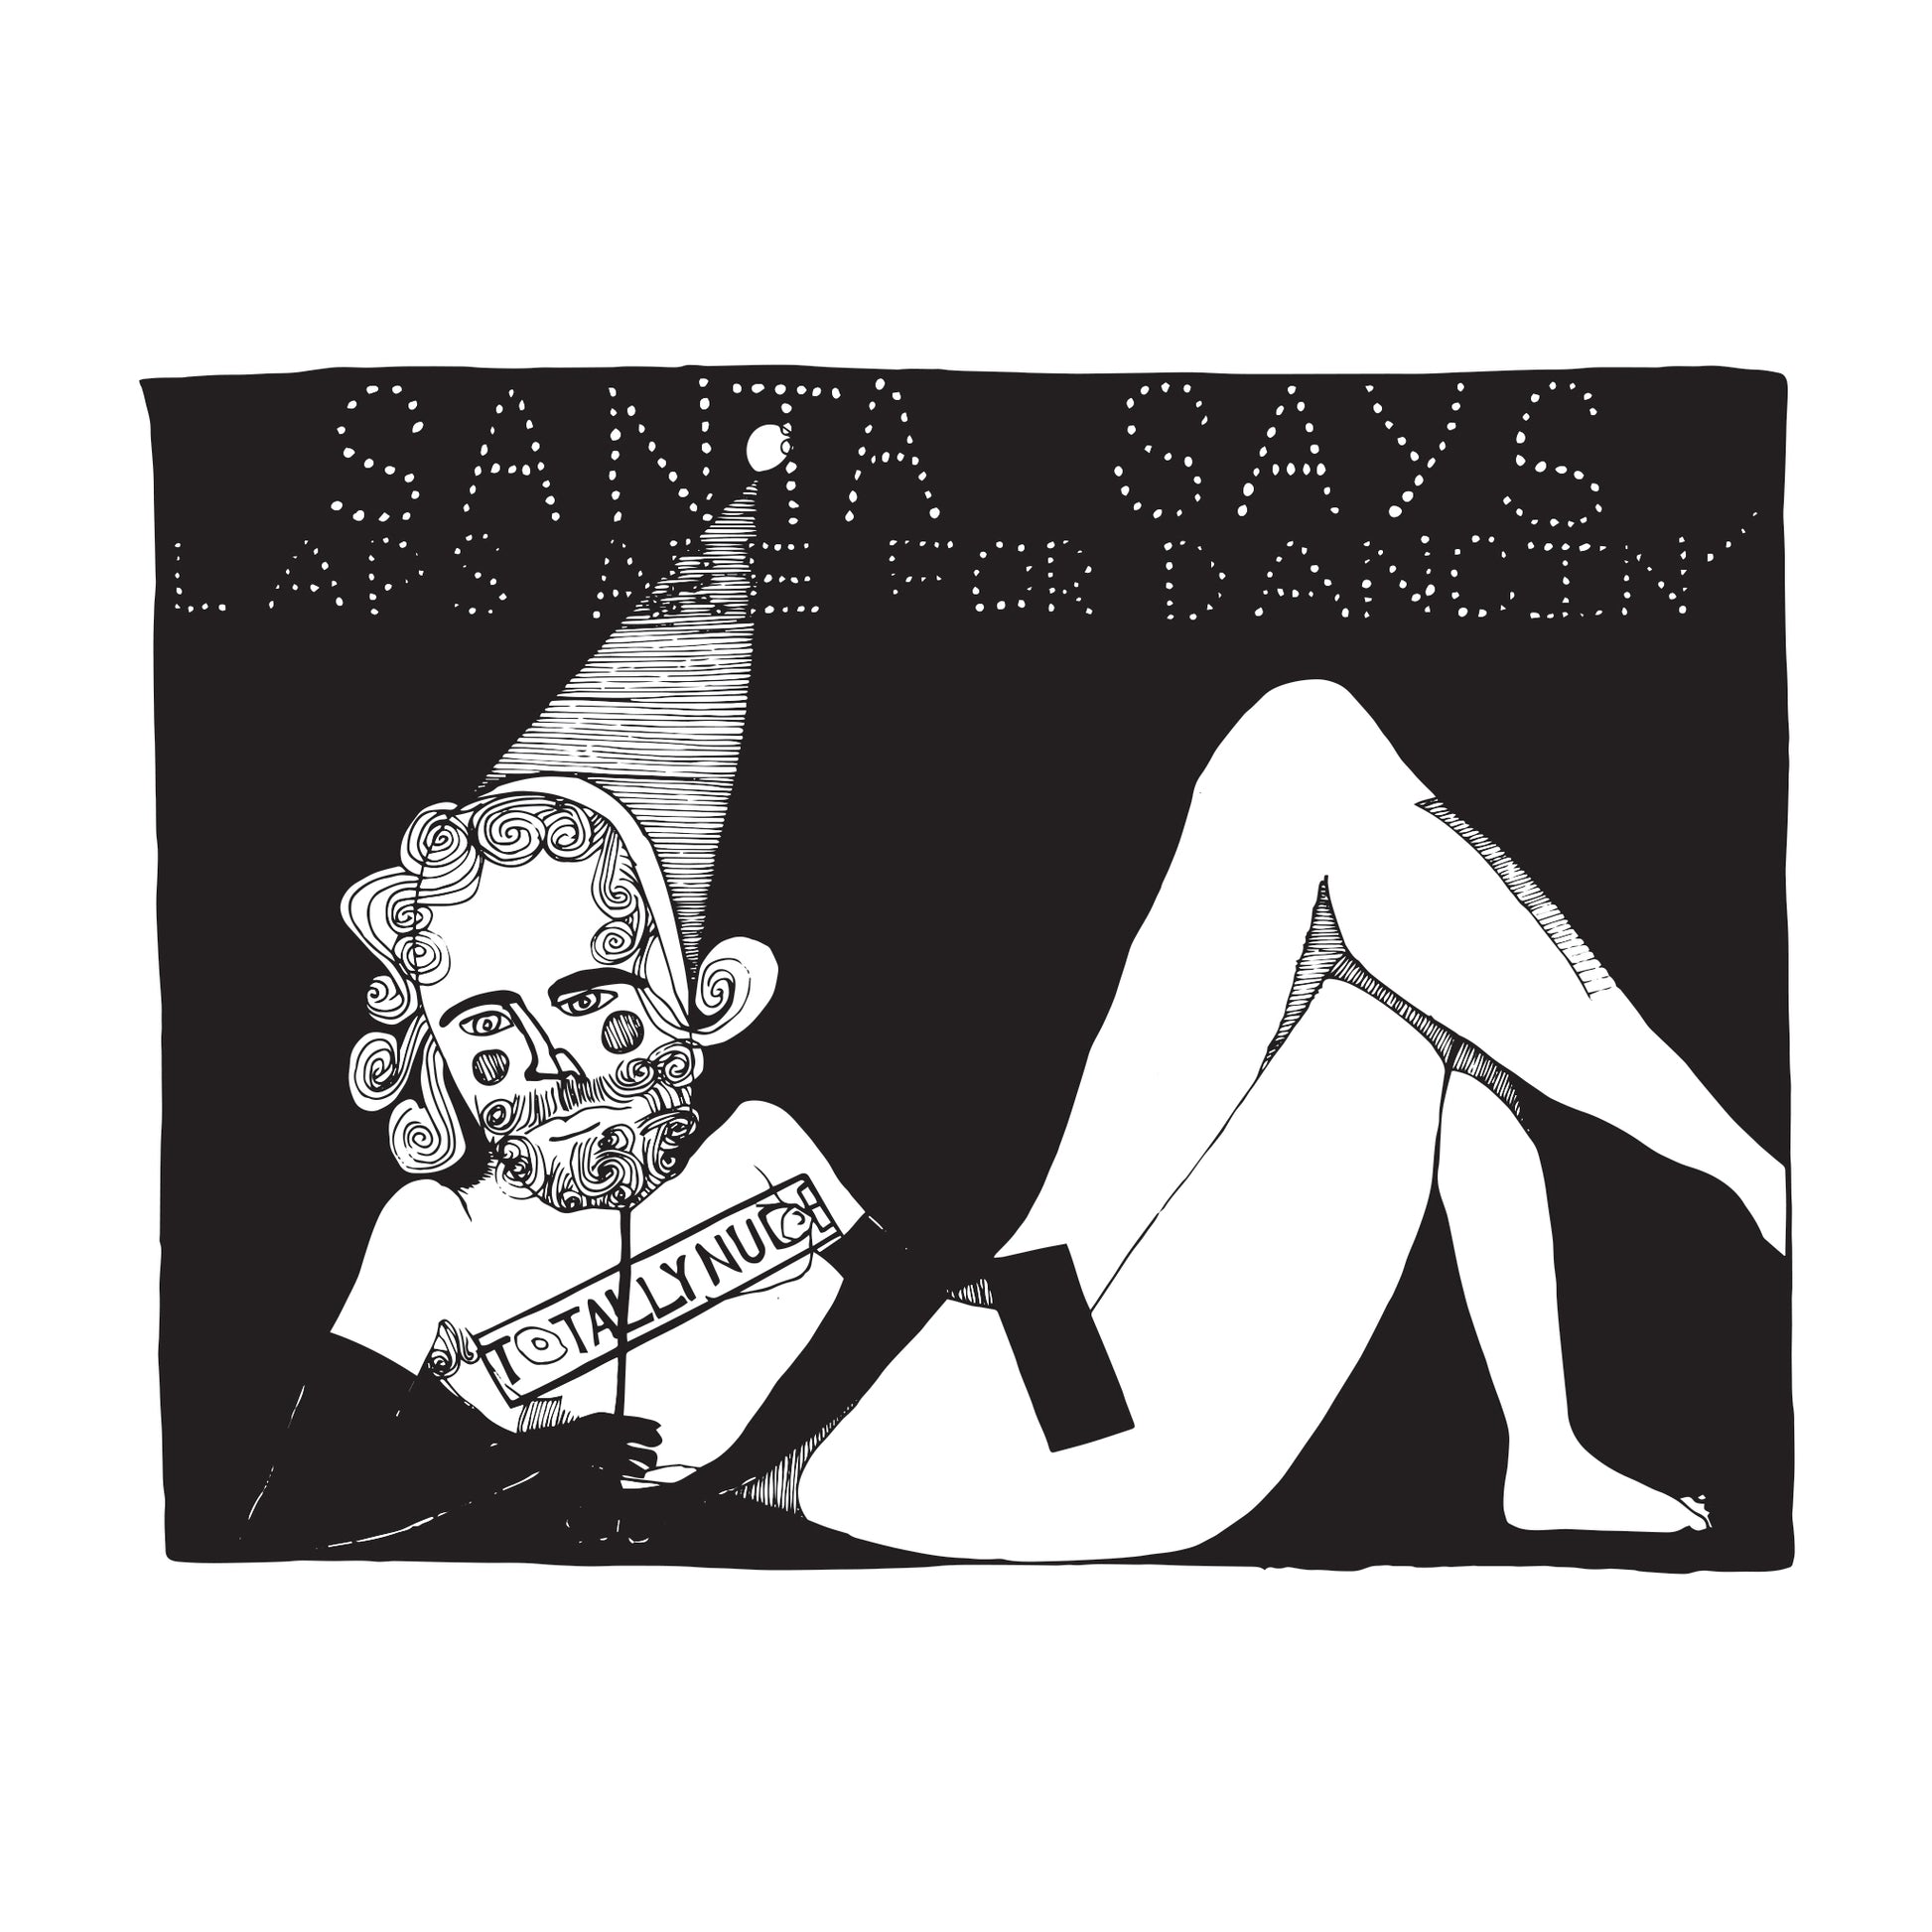 black and white illustration of an exotic dancer wearing black opera length gloves, a santa mask, and a santa hat reclining under a marquee that reads "santa says laps are for dancin'" with a sign over her breasts that says "totally nude" and a black bar over her pubis